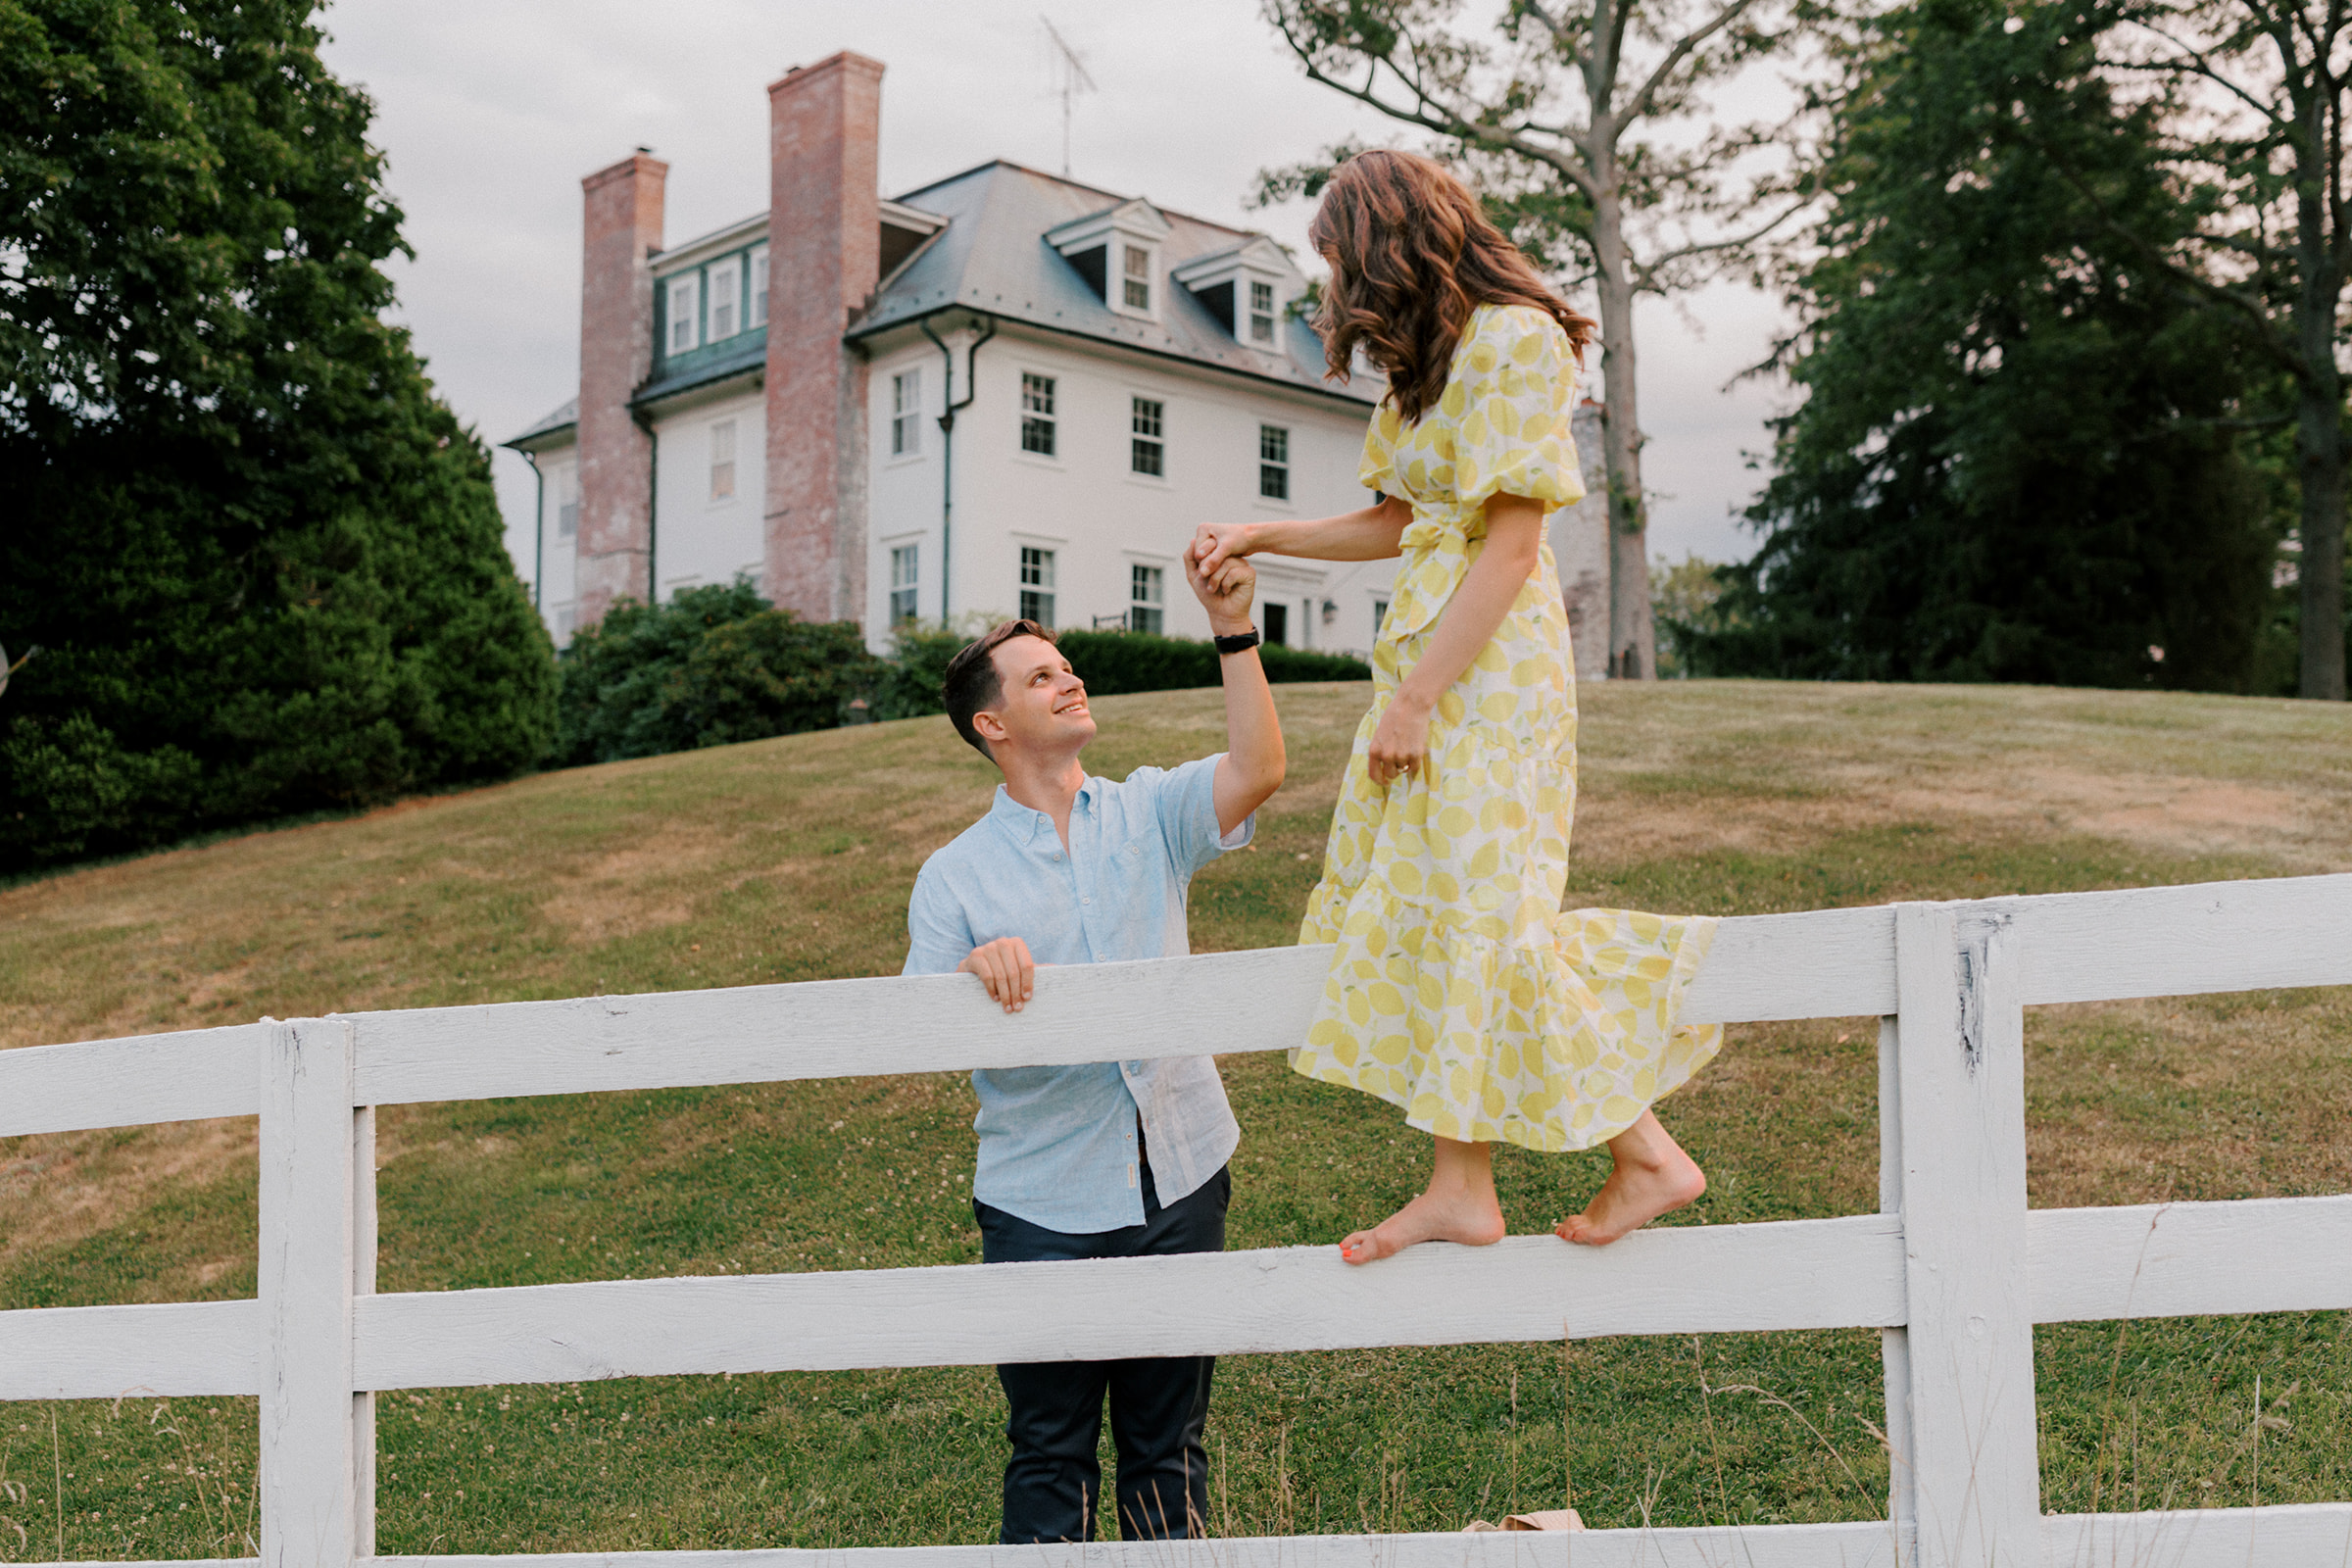 A couple climbs over fence during engagement photos in front of a country farm house estate.